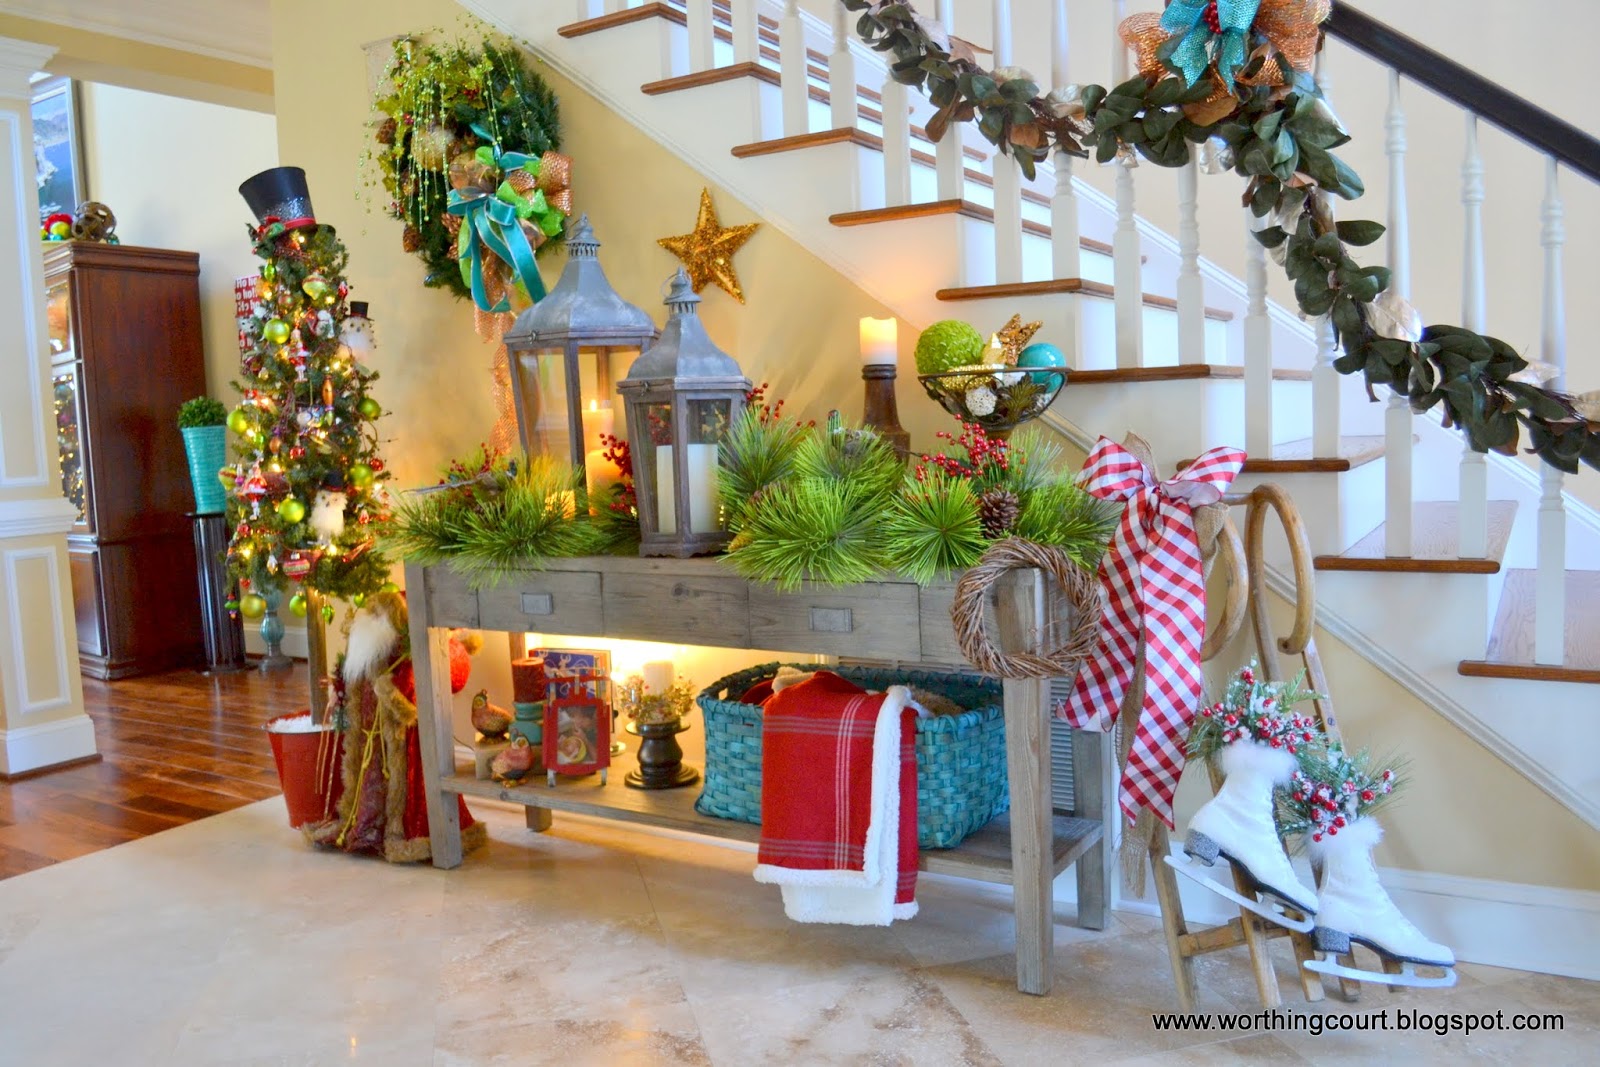 Decorate Your Foyer For Christmas The Easy Way! - Worthing Court